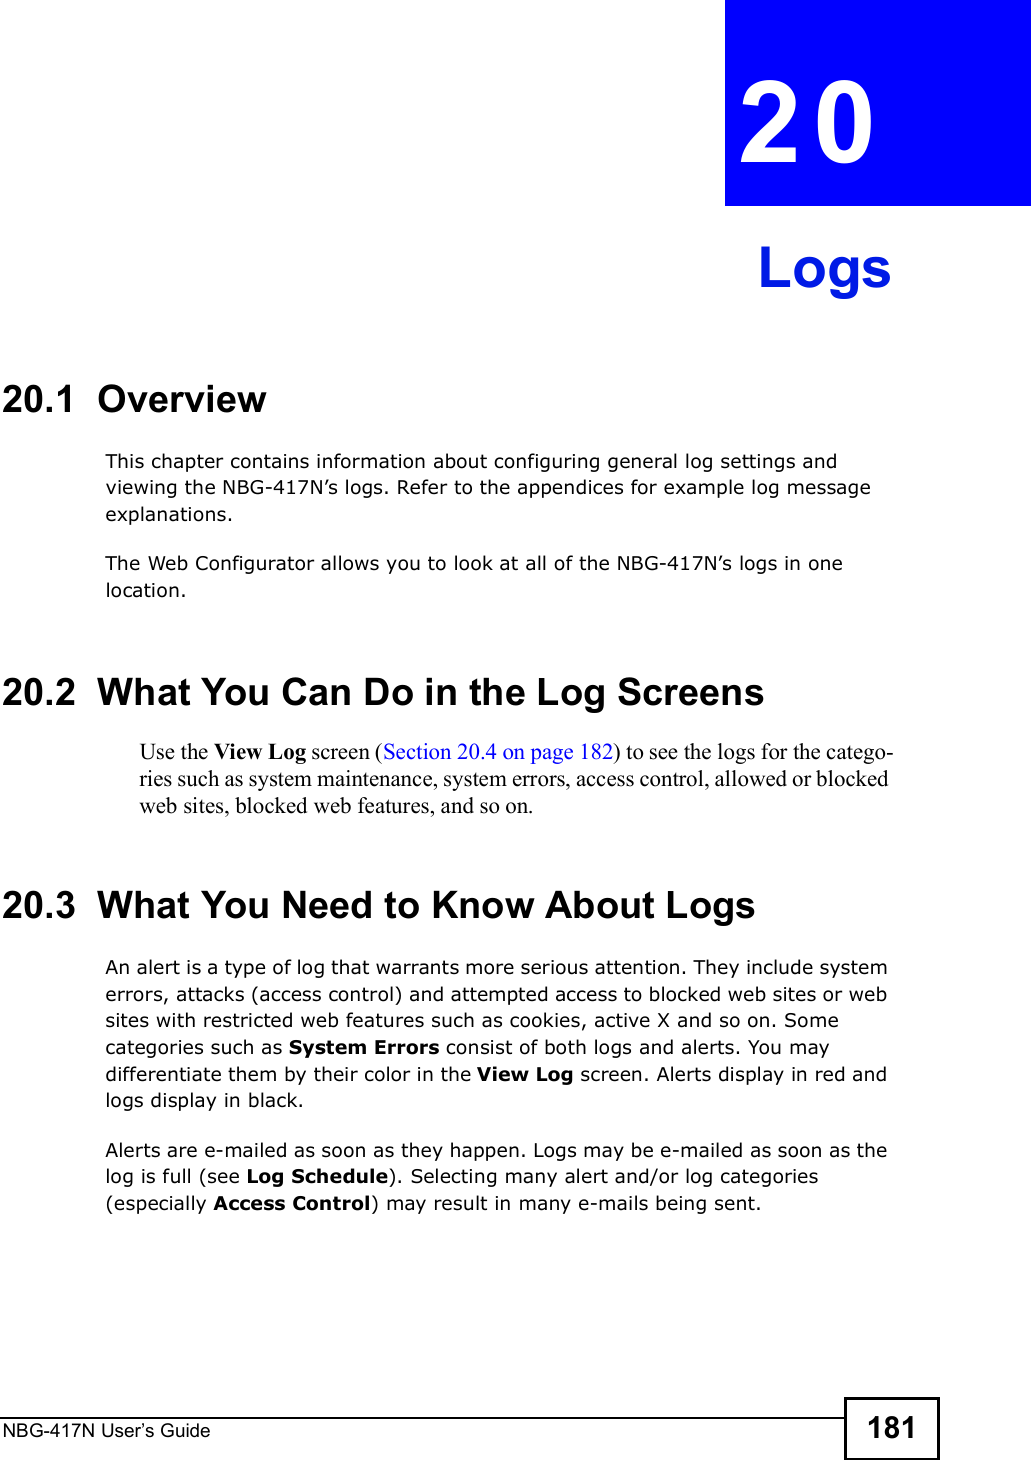 NBG-417N User s Guide 181CHAPTER  20 Logs20.1  OverviewThis chapter contains information about configuring general log settings and viewing the NBG-417N!s logs. Refer to the appendices for example log message explanations. The Web Configurator allows you to look at all of the NBG-417N!s logs in one location. 20.2  What You Can Do in the Log ScreensUse the View Log screen (Section 20.4 on page 182) to see the logs for the catego-ries such as system maintenance, system errors, access control, allowed or blocked web sites, blocked web features, and so on.20.3  What You Need to Know About LogsAn alert is a type of log that warrants more serious attention. They include system errors, attacks (access control) and attempted access to blocked web sites or web sites with restricted web features such as cookies, active X and so on. Some categories such as System Errors consist of both logs and alerts. You may differentiate them by their color in the View Log screen. Alerts display in red and logs display in black.Alerts are e-mailed as soon as they happen. Logs may be e-mailed as soon as the log is full (see Log Schedule). Selecting many alert and/or log categories (especially Access Control) may result in many e-mails being sent.